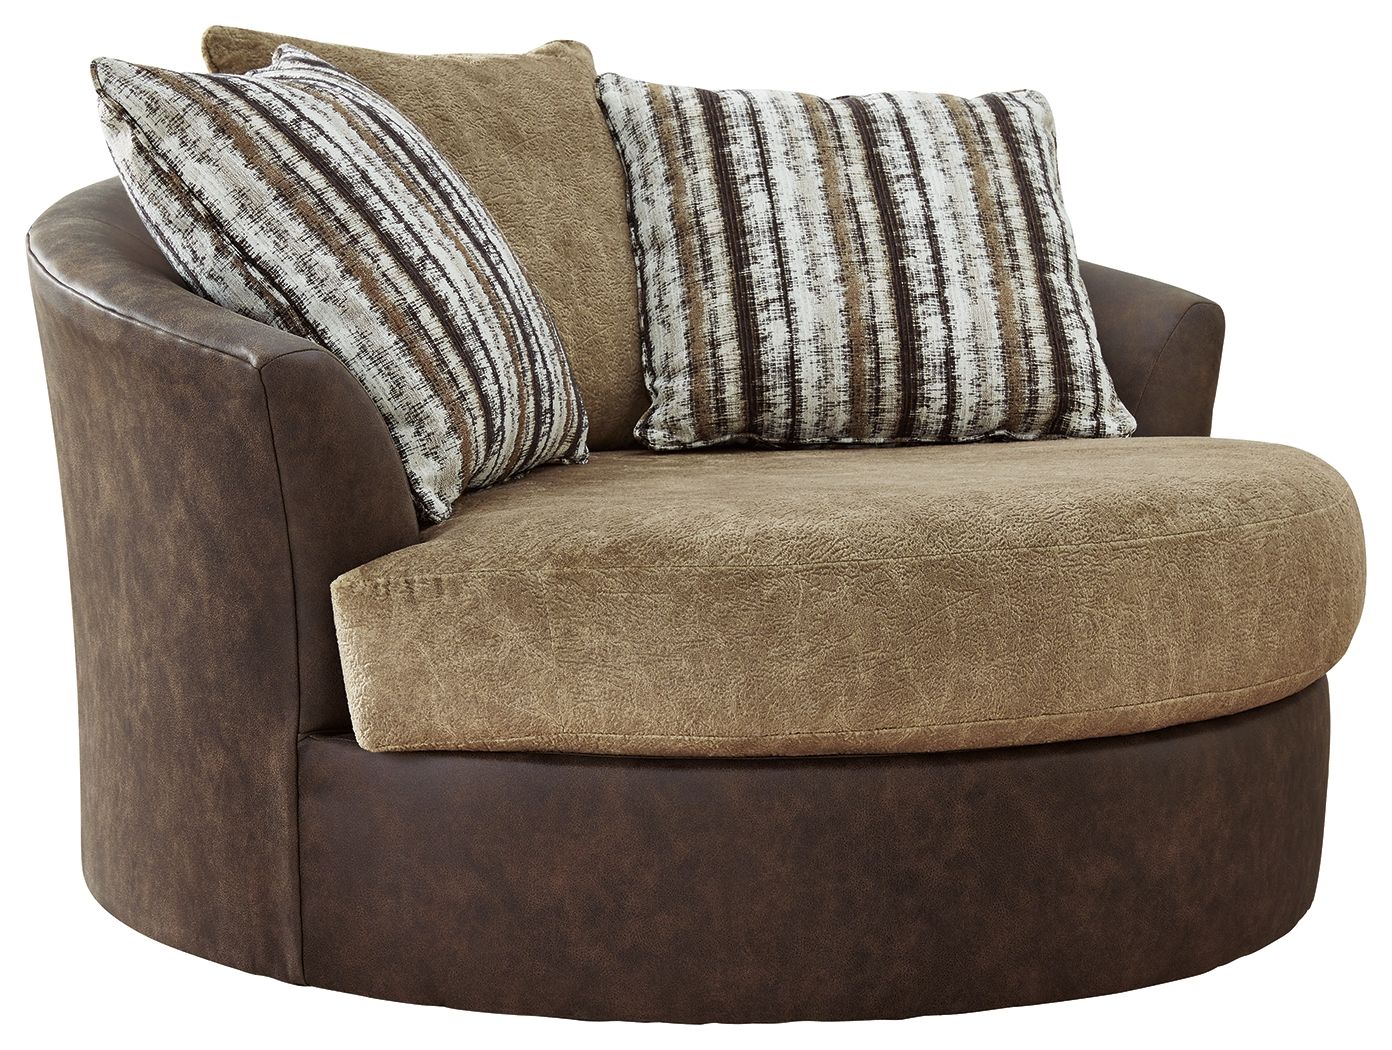 Alesbury - Chocolate - Oversized Swivel Accent Chair